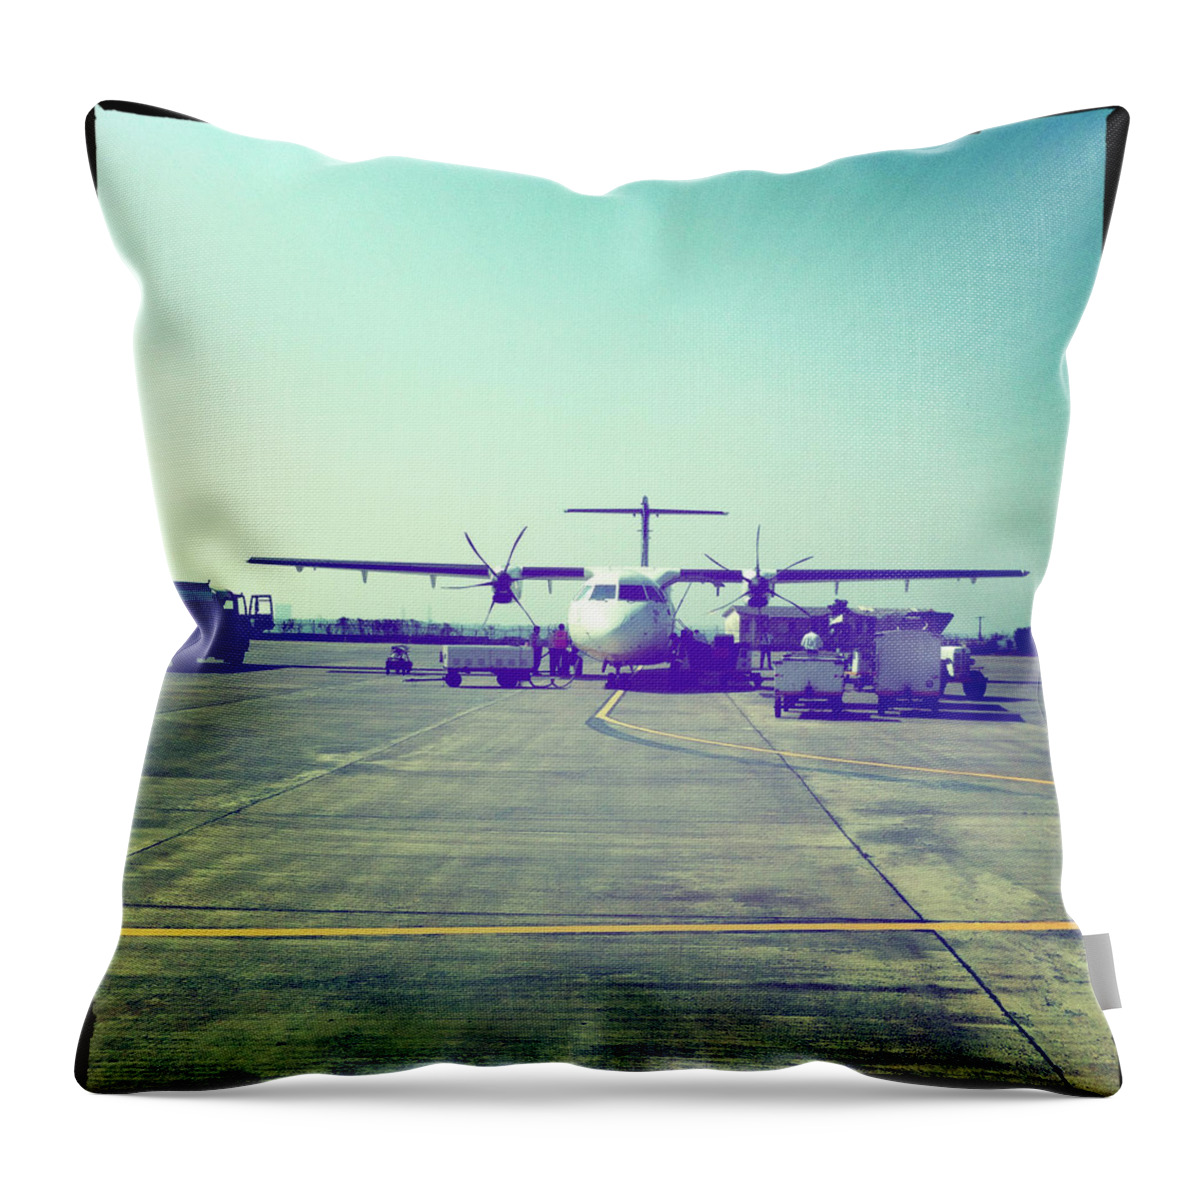 Tranquility Throw Pillow featuring the photograph Aircraft Refueling by Ixefra